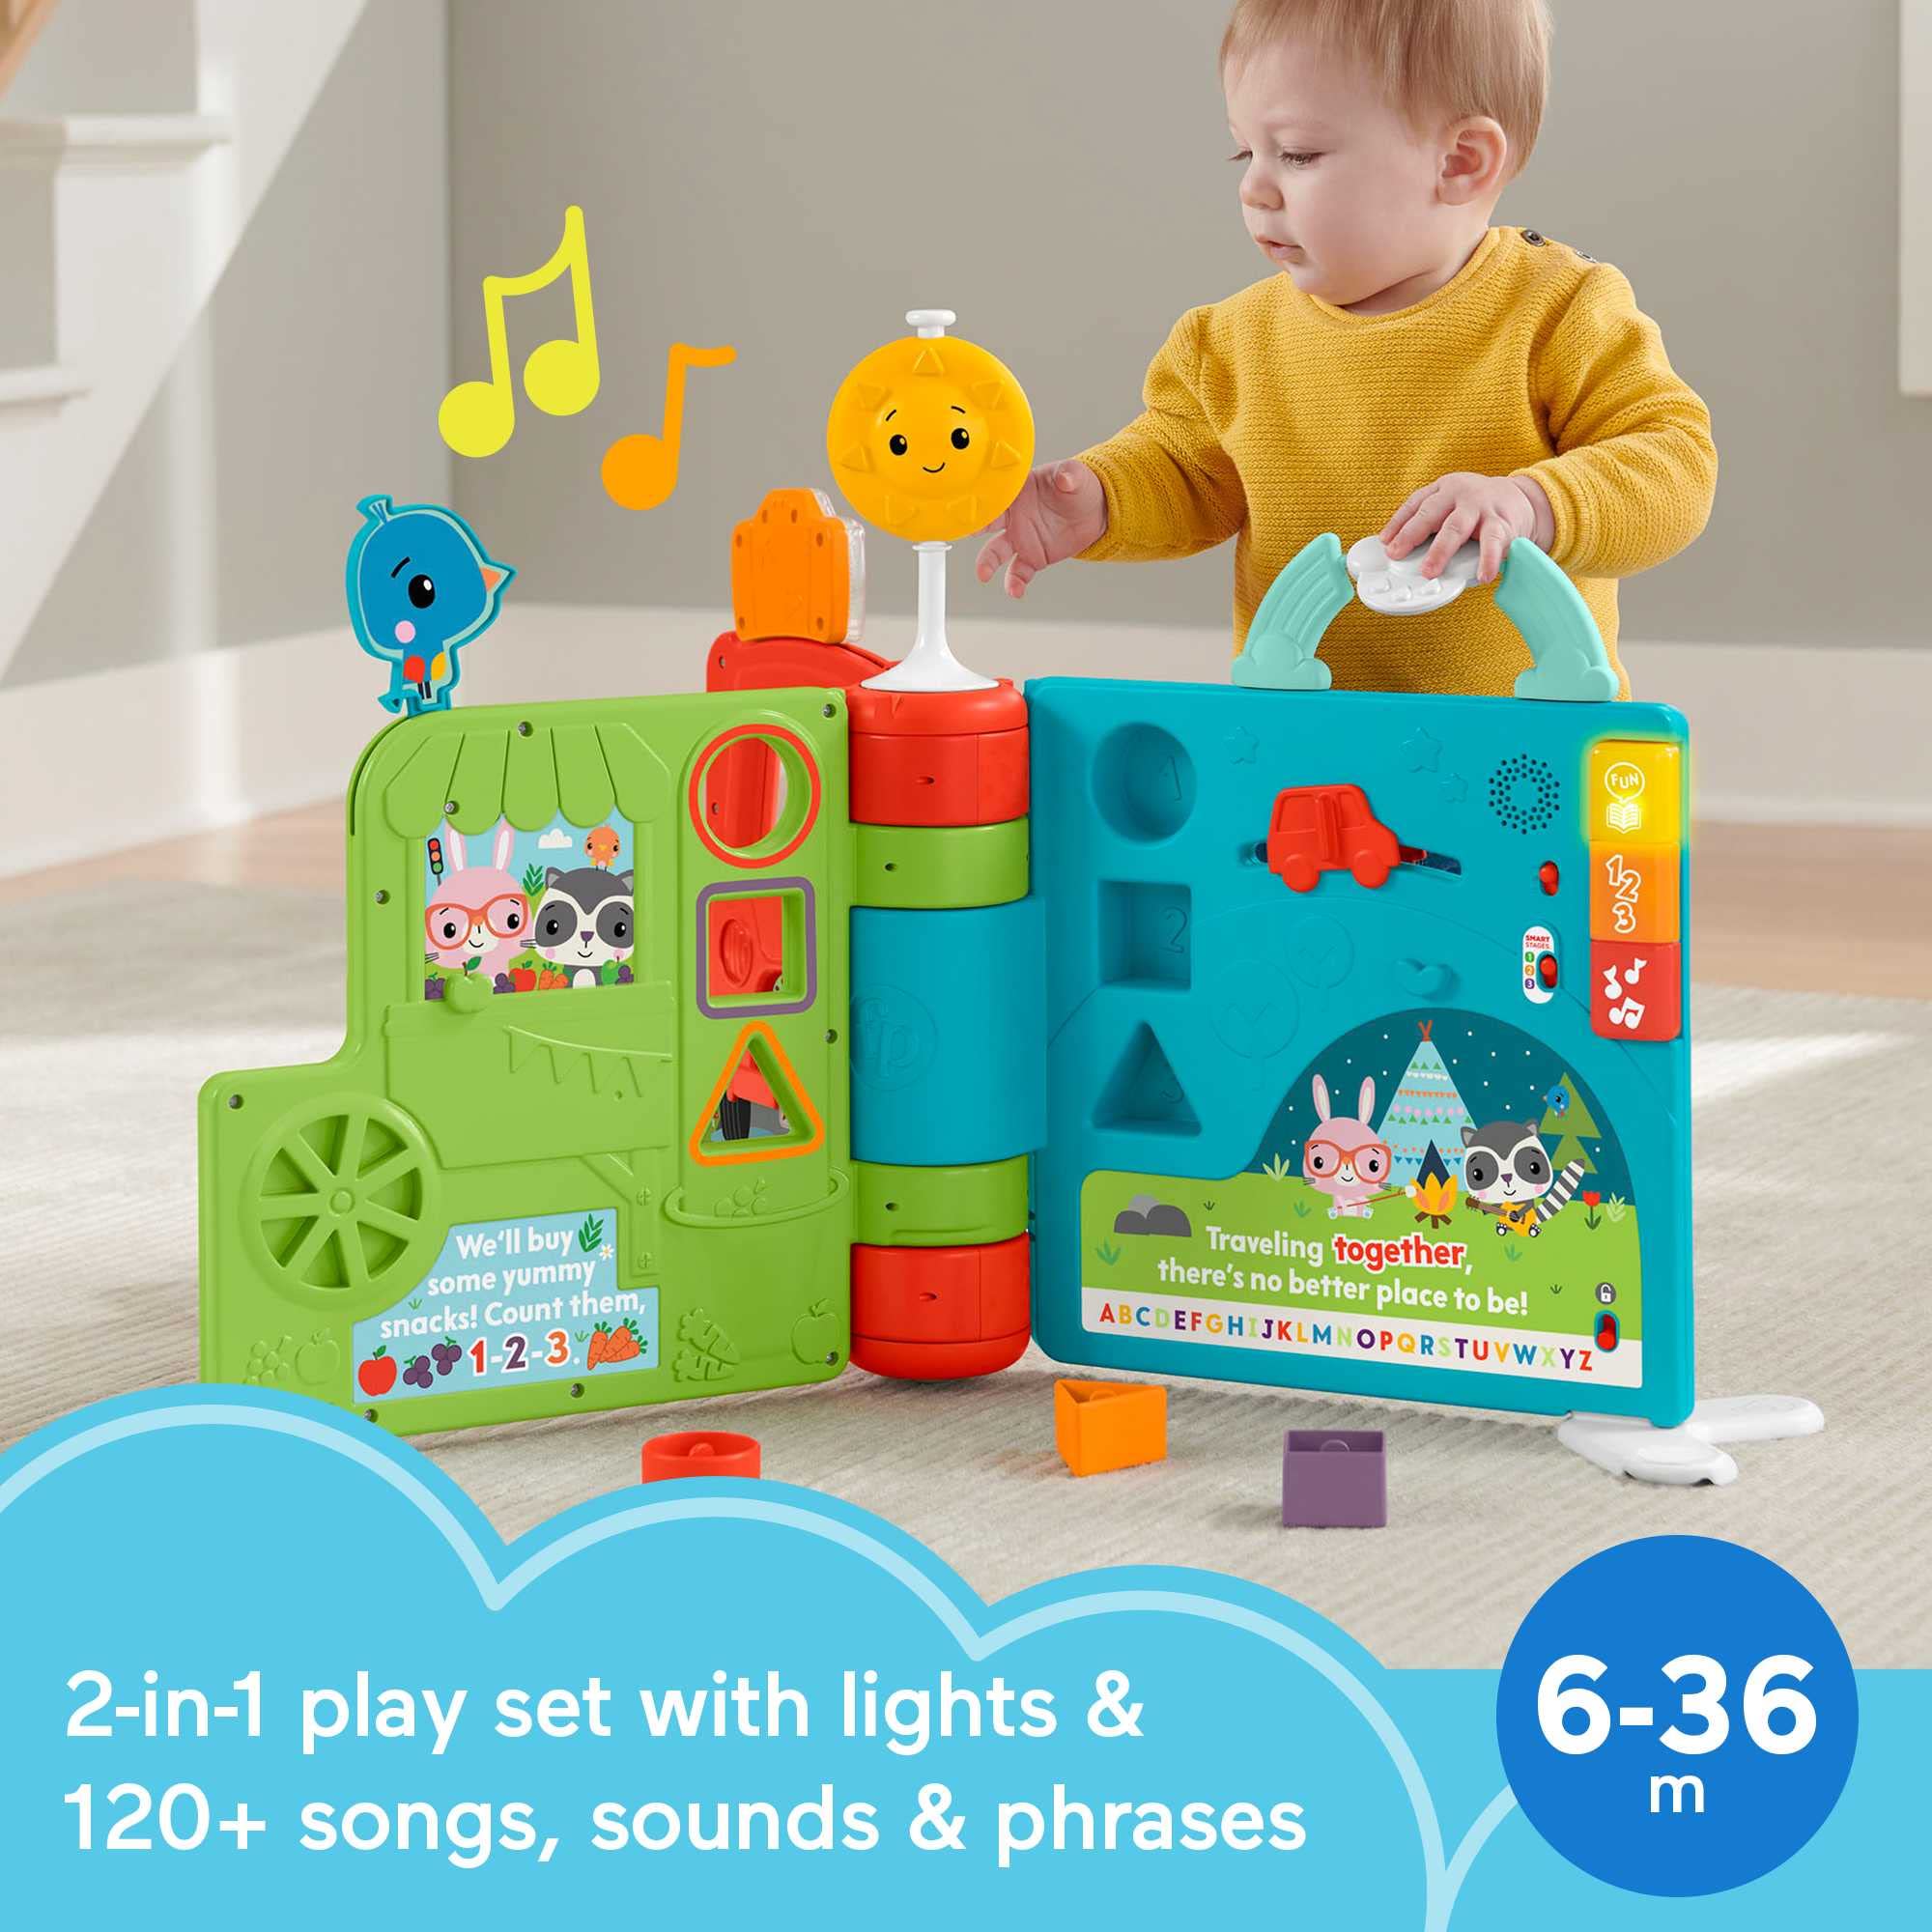 Fisher-Price Sit-to-Stand Giant Activity Book, Electronic Learning Toy and Activity Center for Infants and Toddlers Ages 6 Months to 3 Years